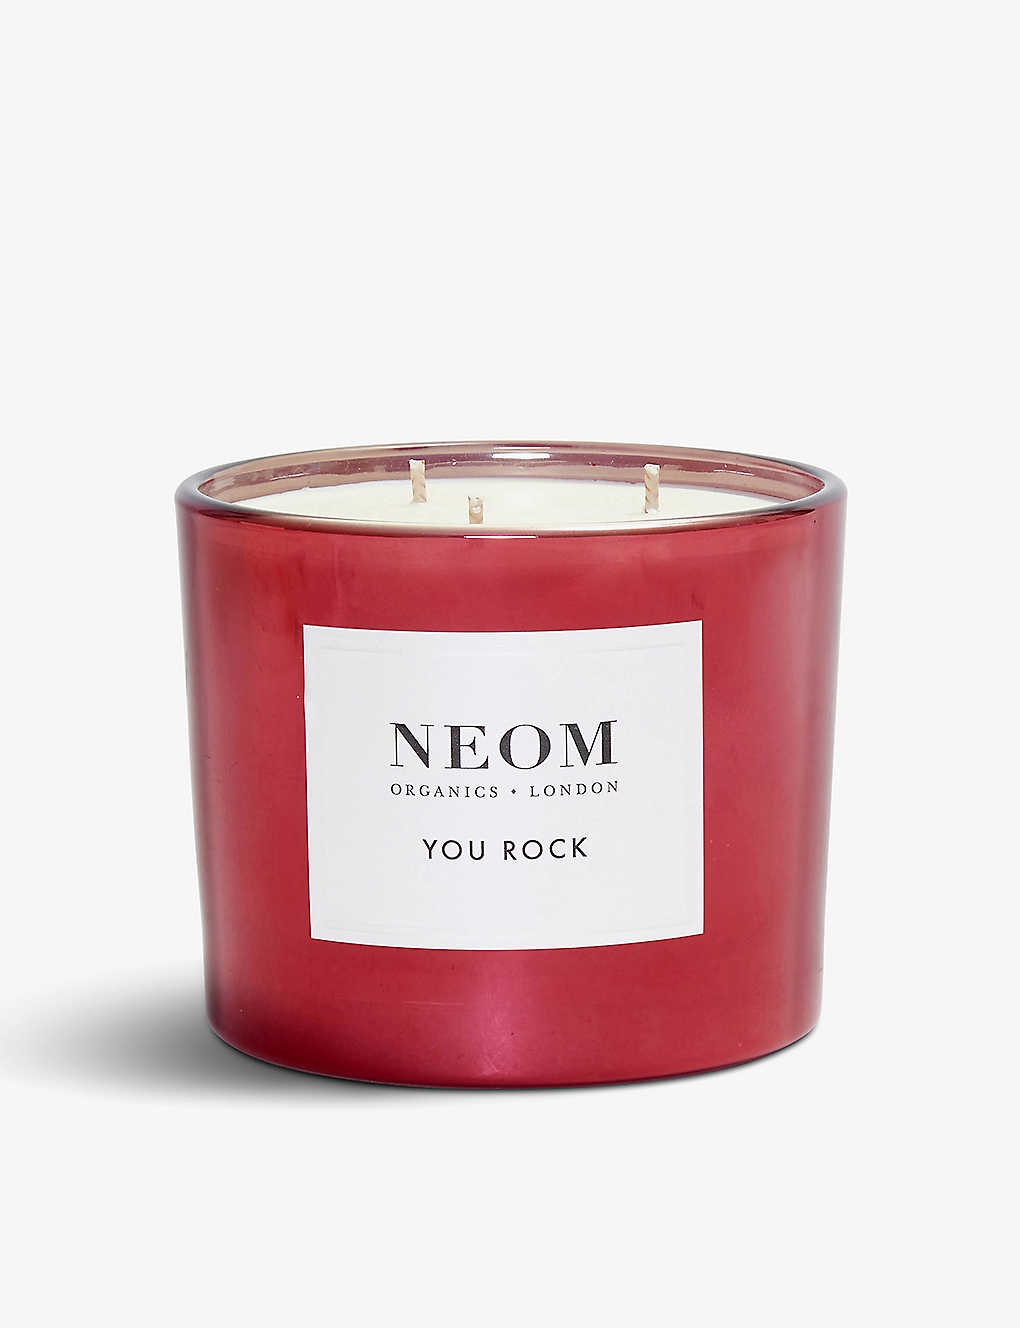 You Rock three-wick scented candle 420g NEOM